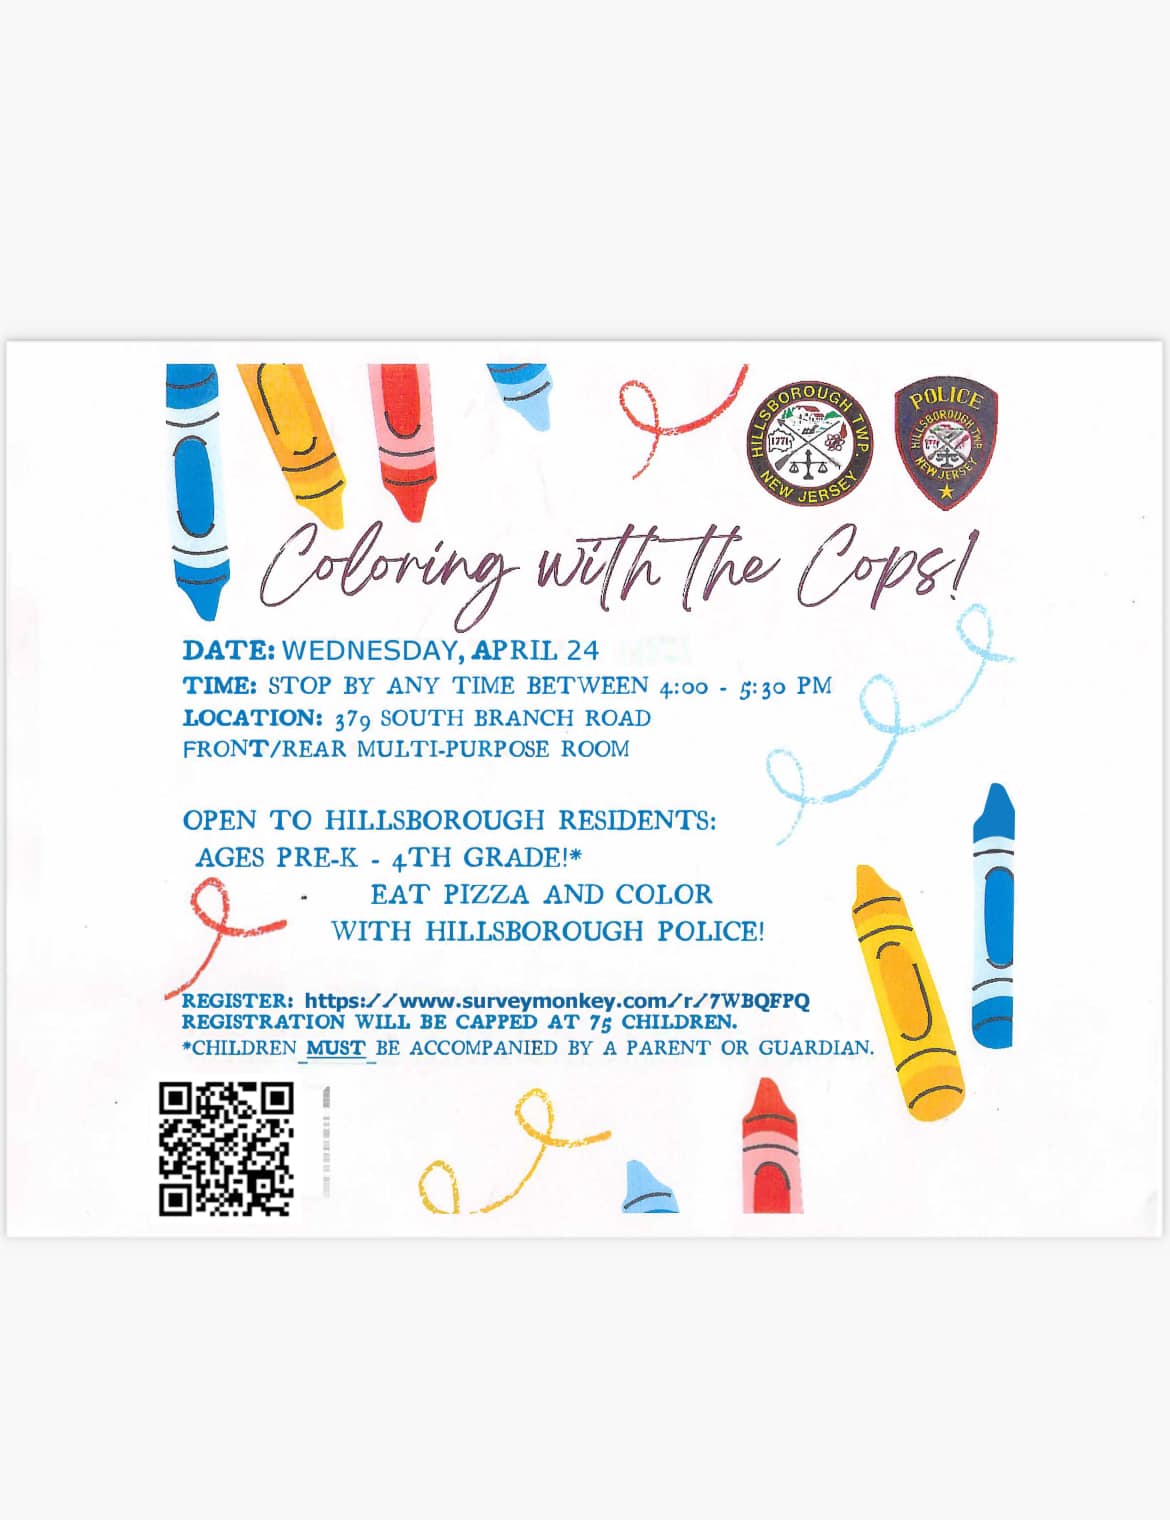 Coloring with the Cops